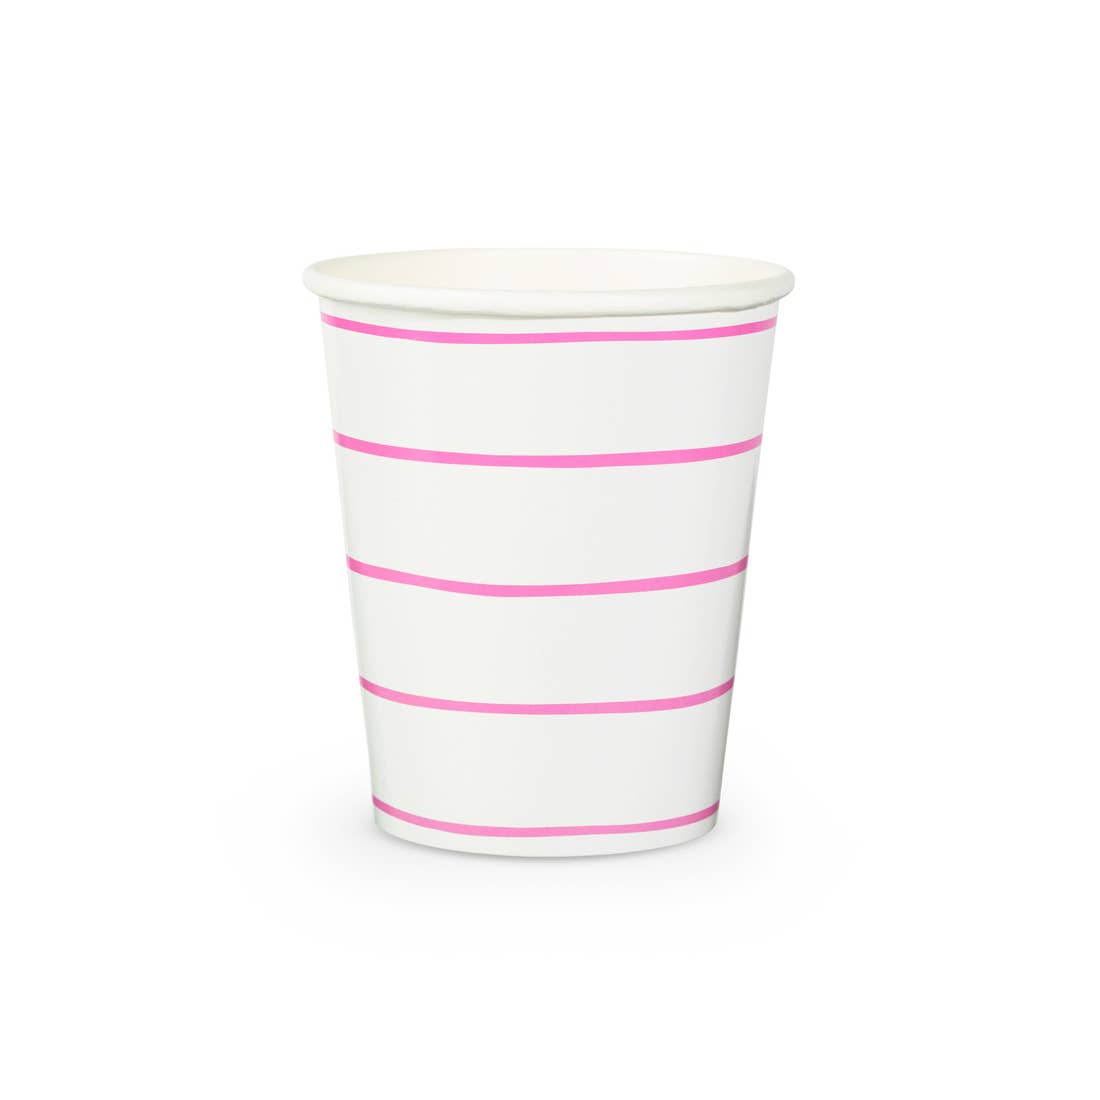 Frenchie Striped Cups in Cerise